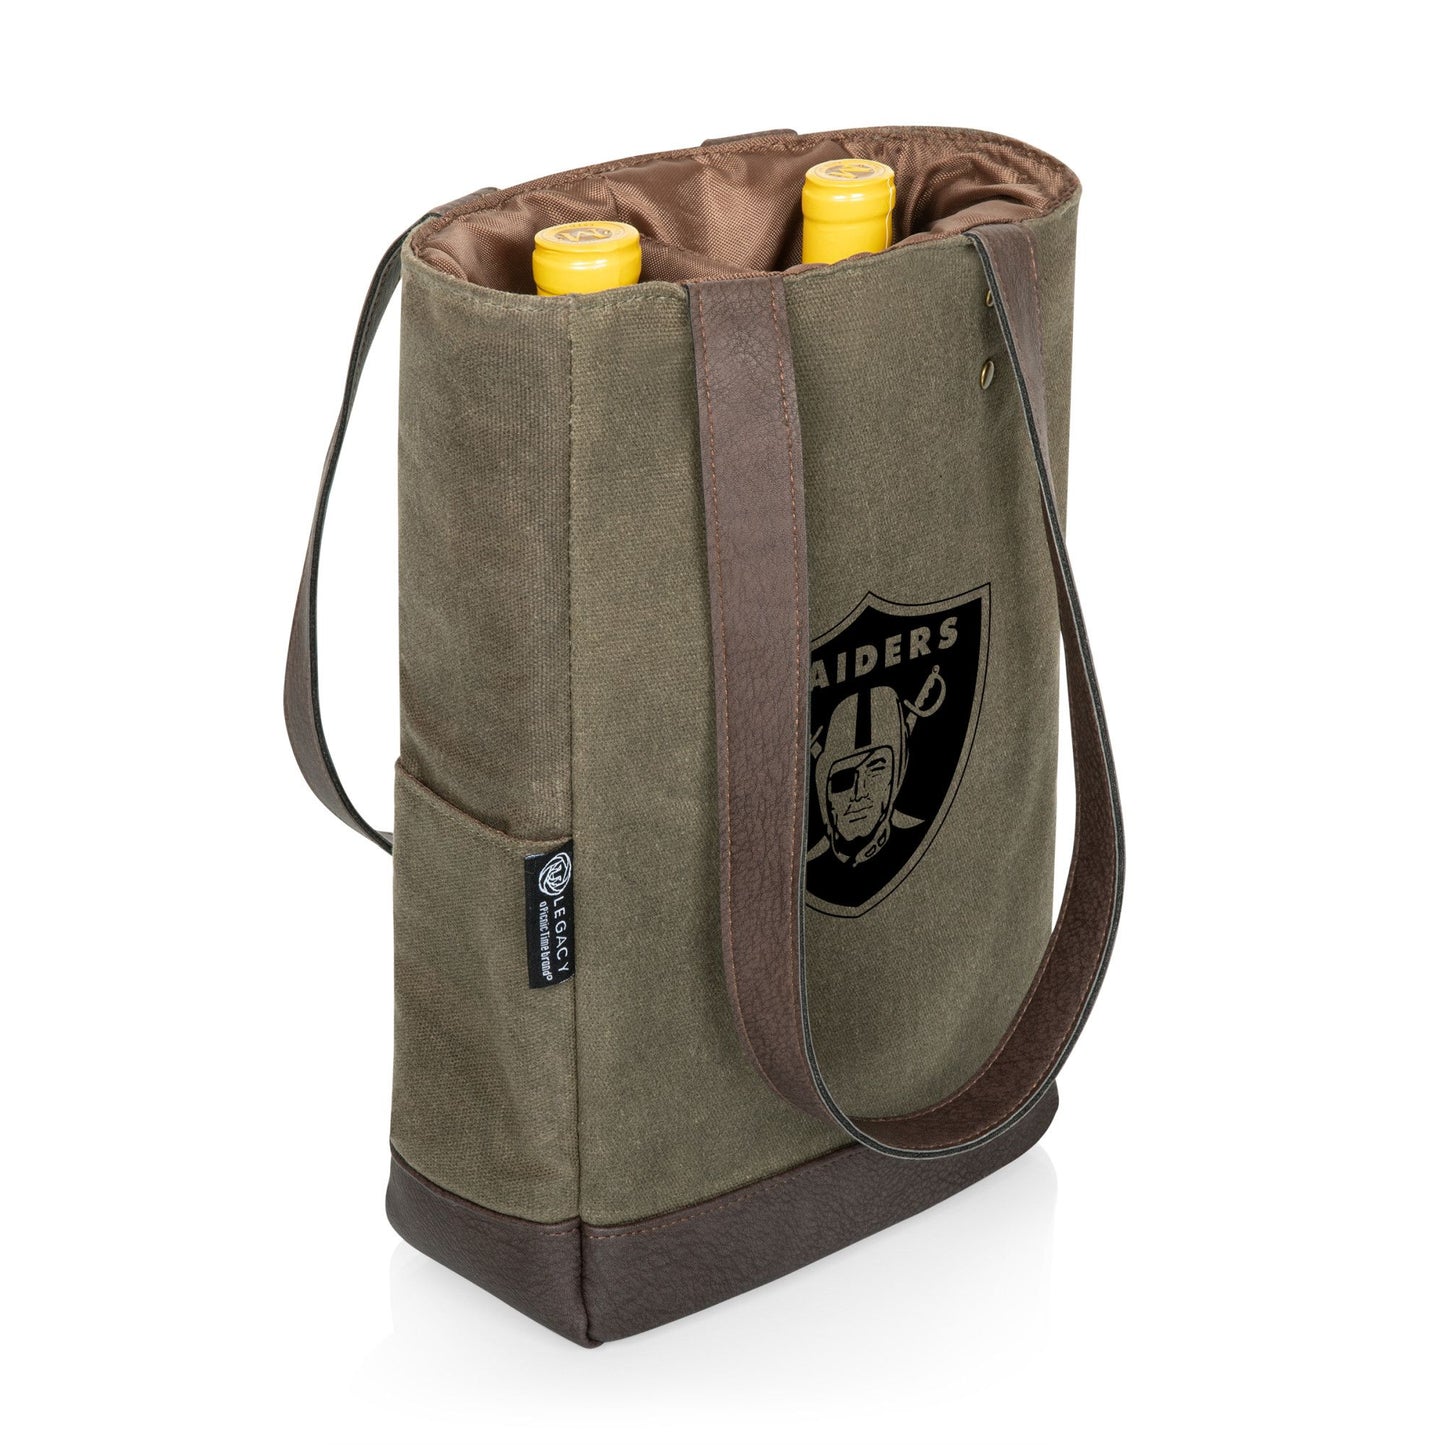 Las Vegas Raiders 2 Bottle Insulated Wine Cooler Bag, (Khaki Green with Beige Accents)